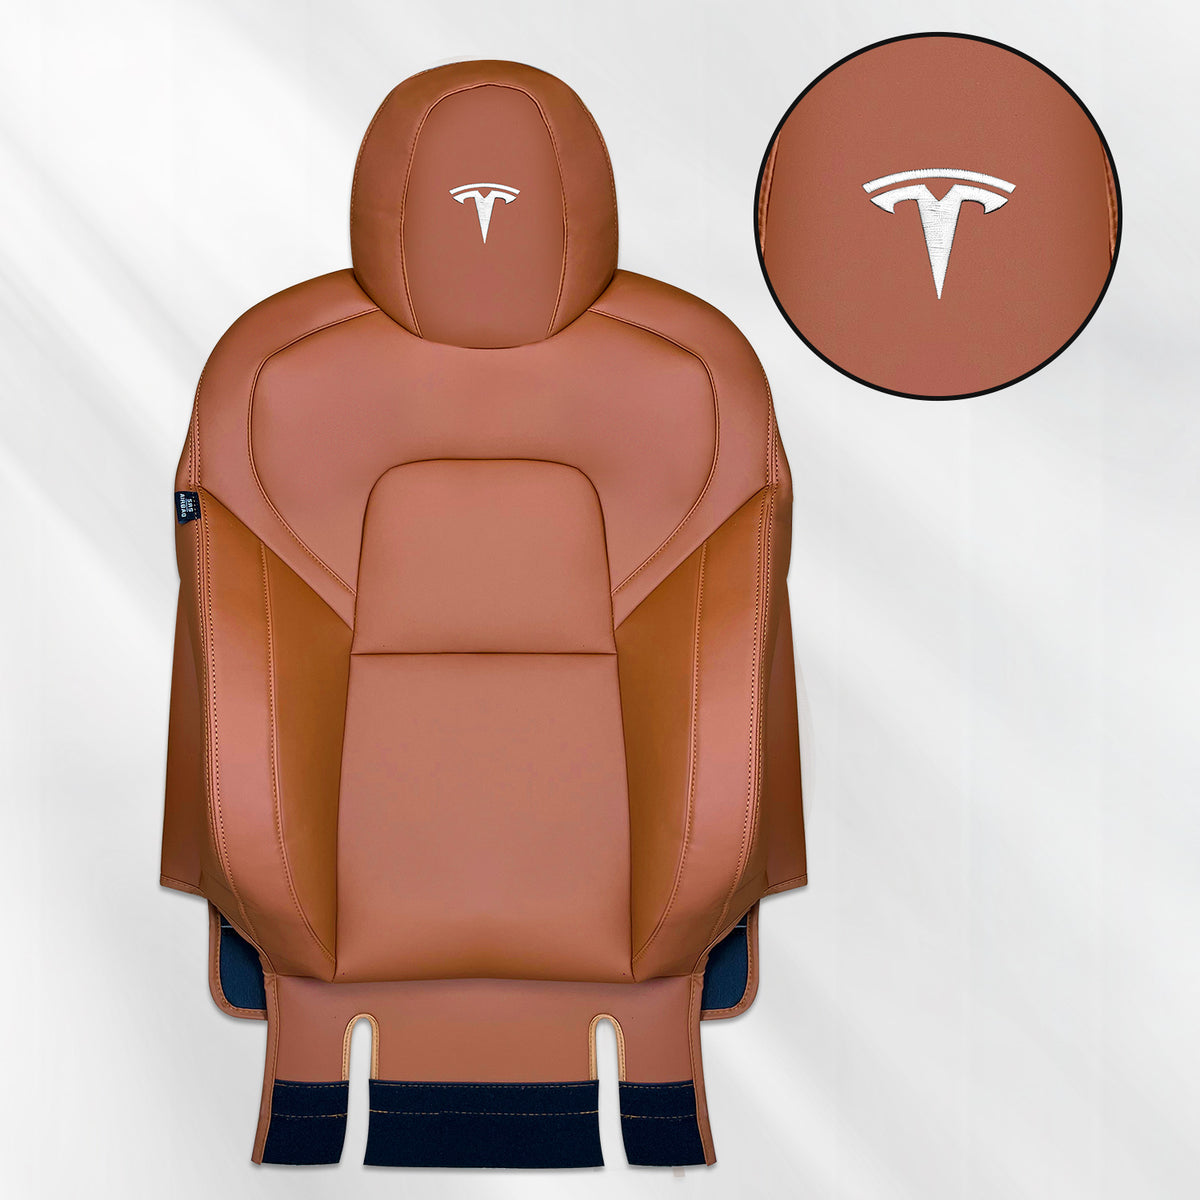 EVAAM® Embroidery Customized logo for Leather Full Seat Covers - EVAAM